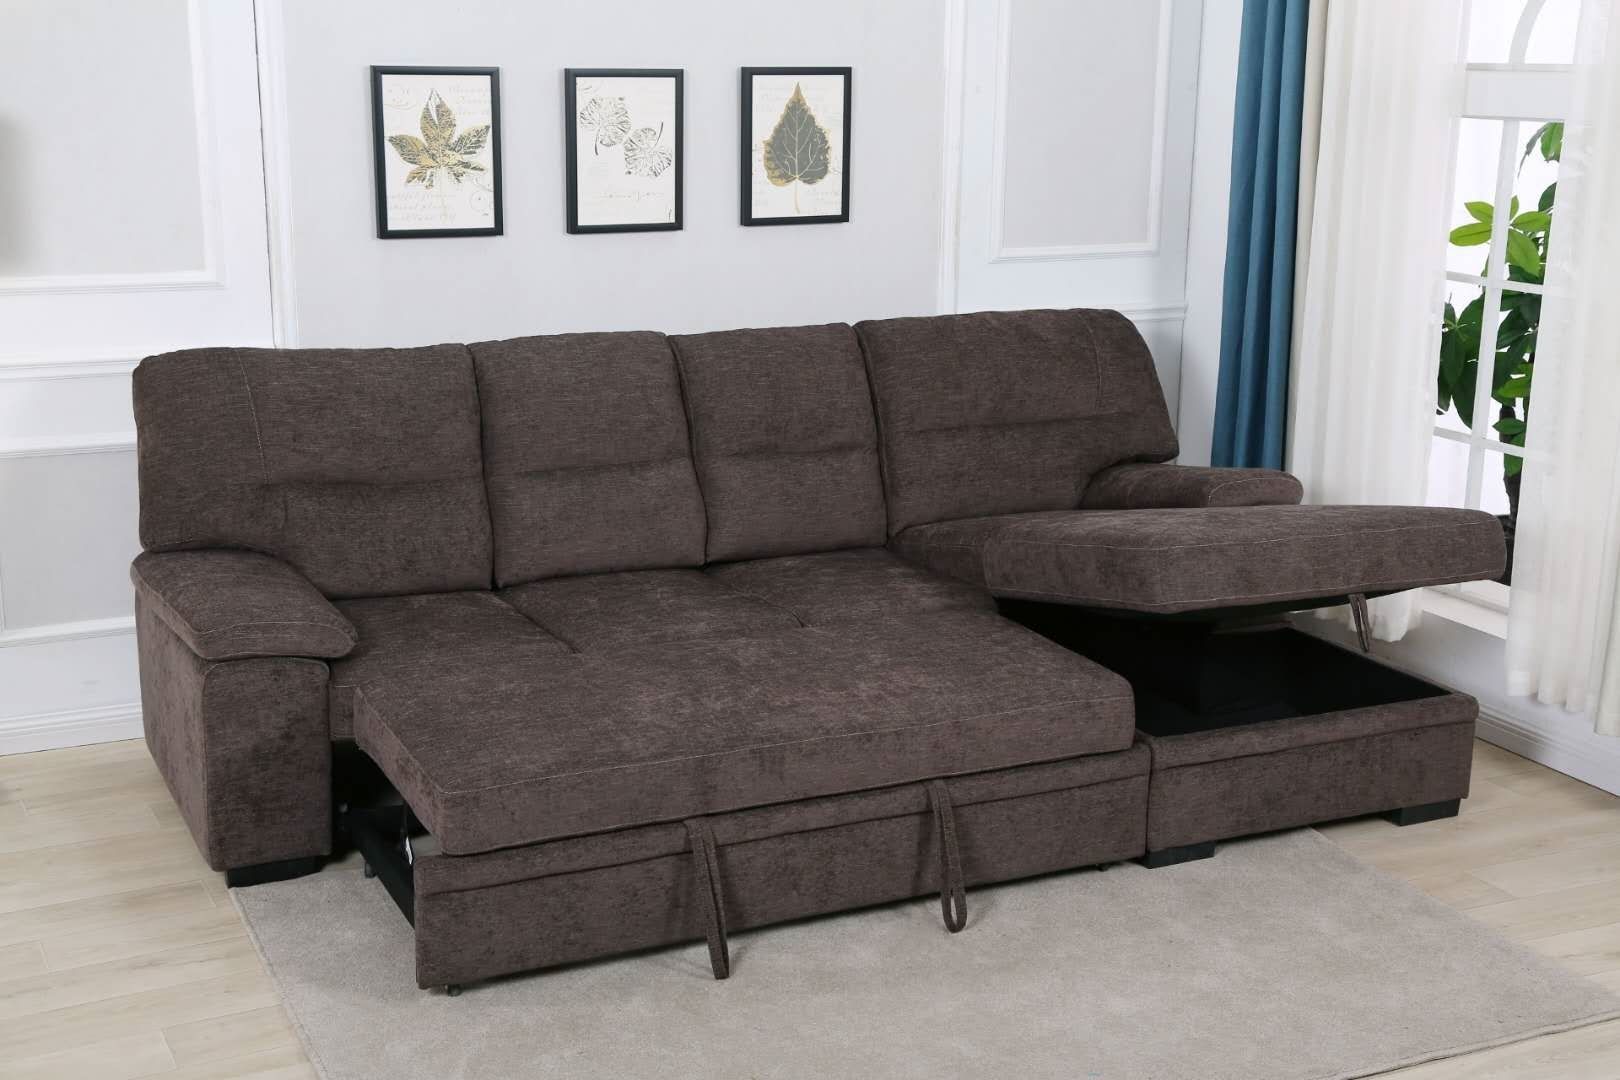 Silvio Sectional Sofa/ Sofa Bed With Storage Ifurniture In Live It Cozy Sectional Sofa Beds With Storage (View 5 of 15)